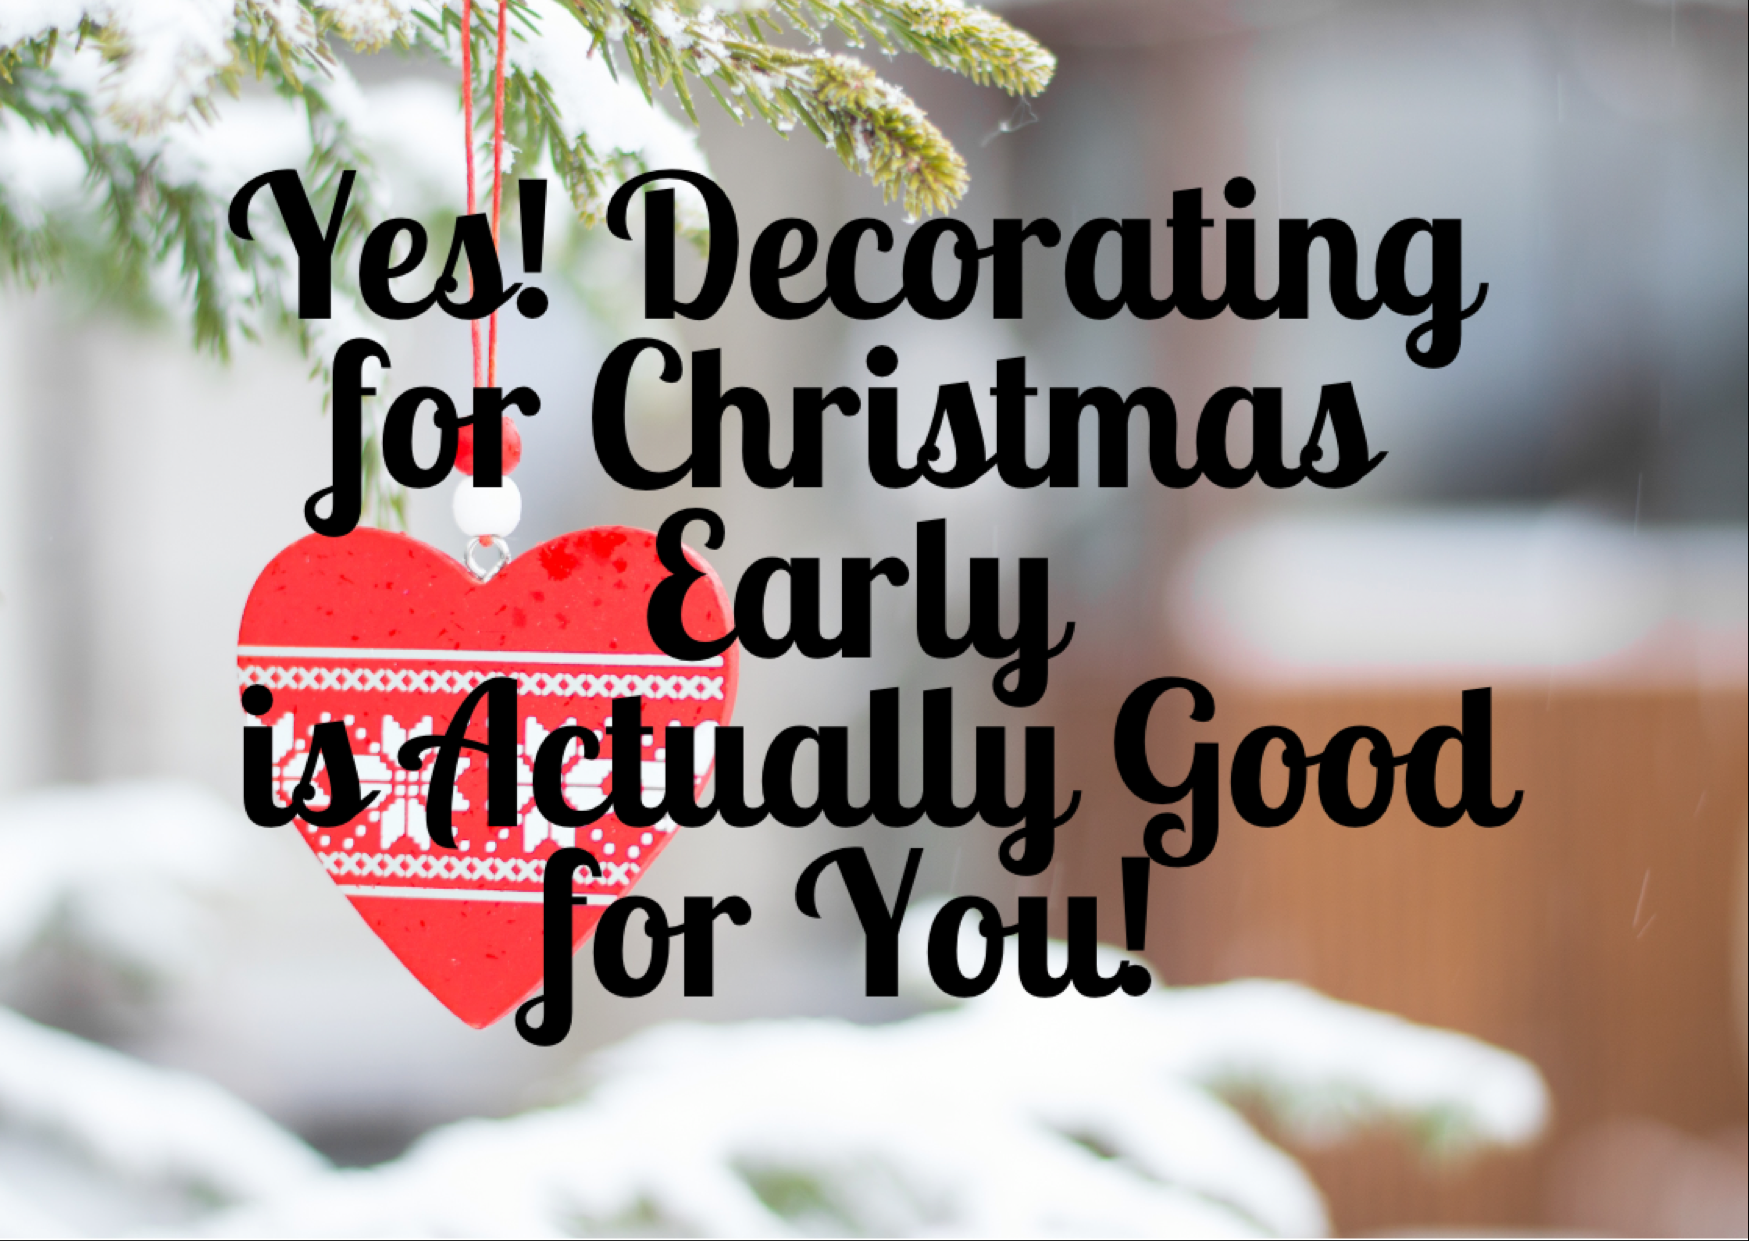 “Yes! Decorating for Christmas Early is Actually Good for You!”